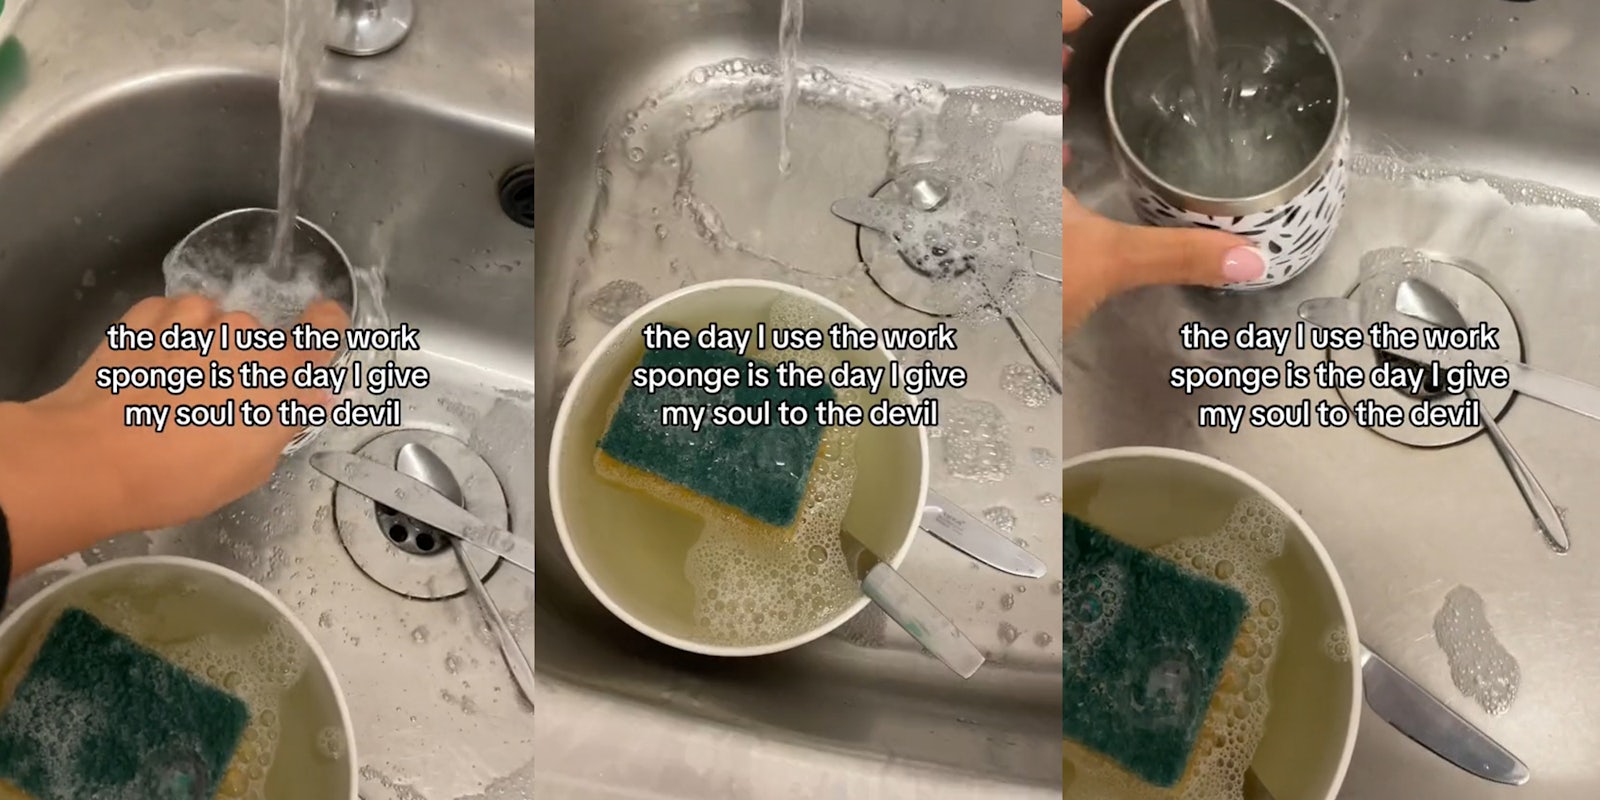 Office worker refuses to use the communal ‘work sponge’ to wash their dish